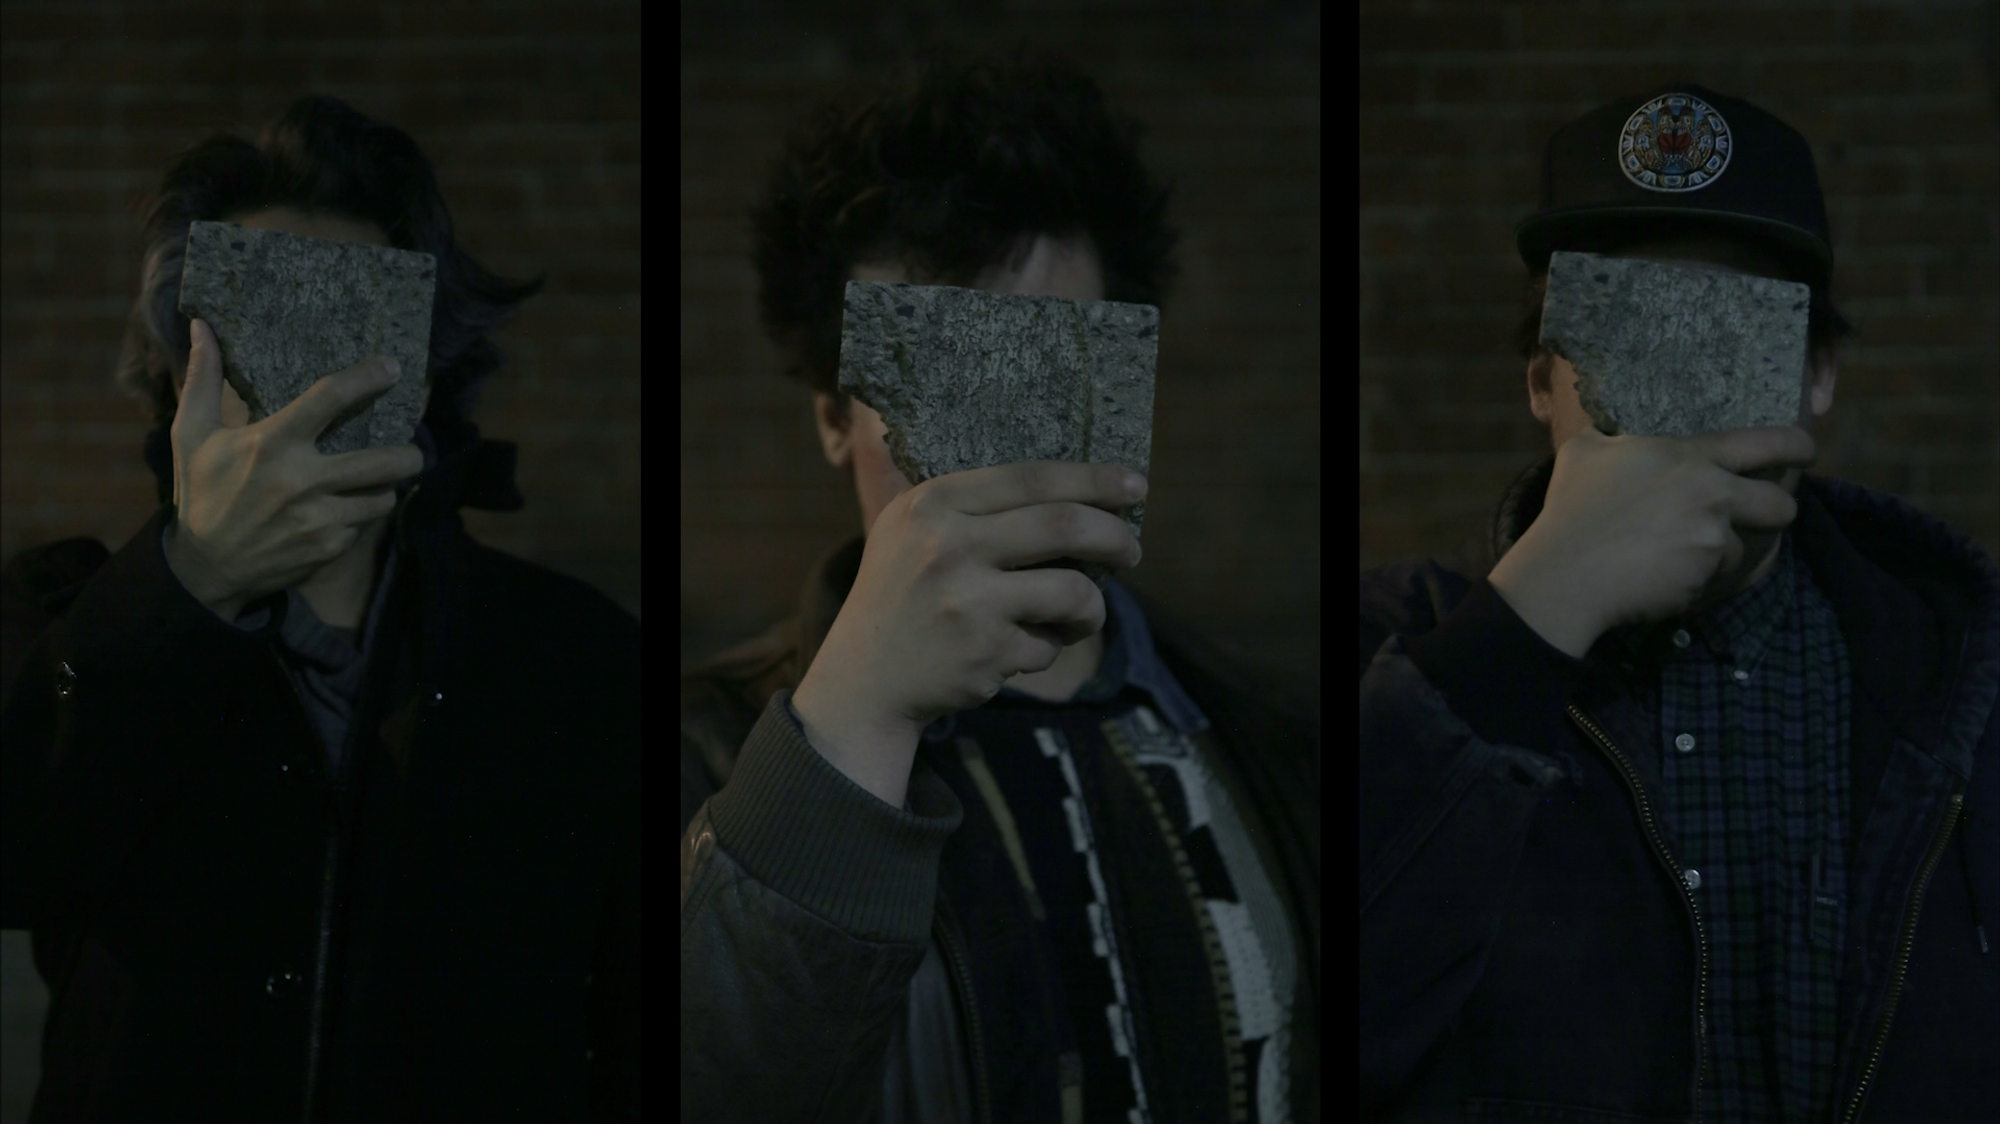 Three portraits arranged in a triptych, with people holding rocks to obscure their faces.